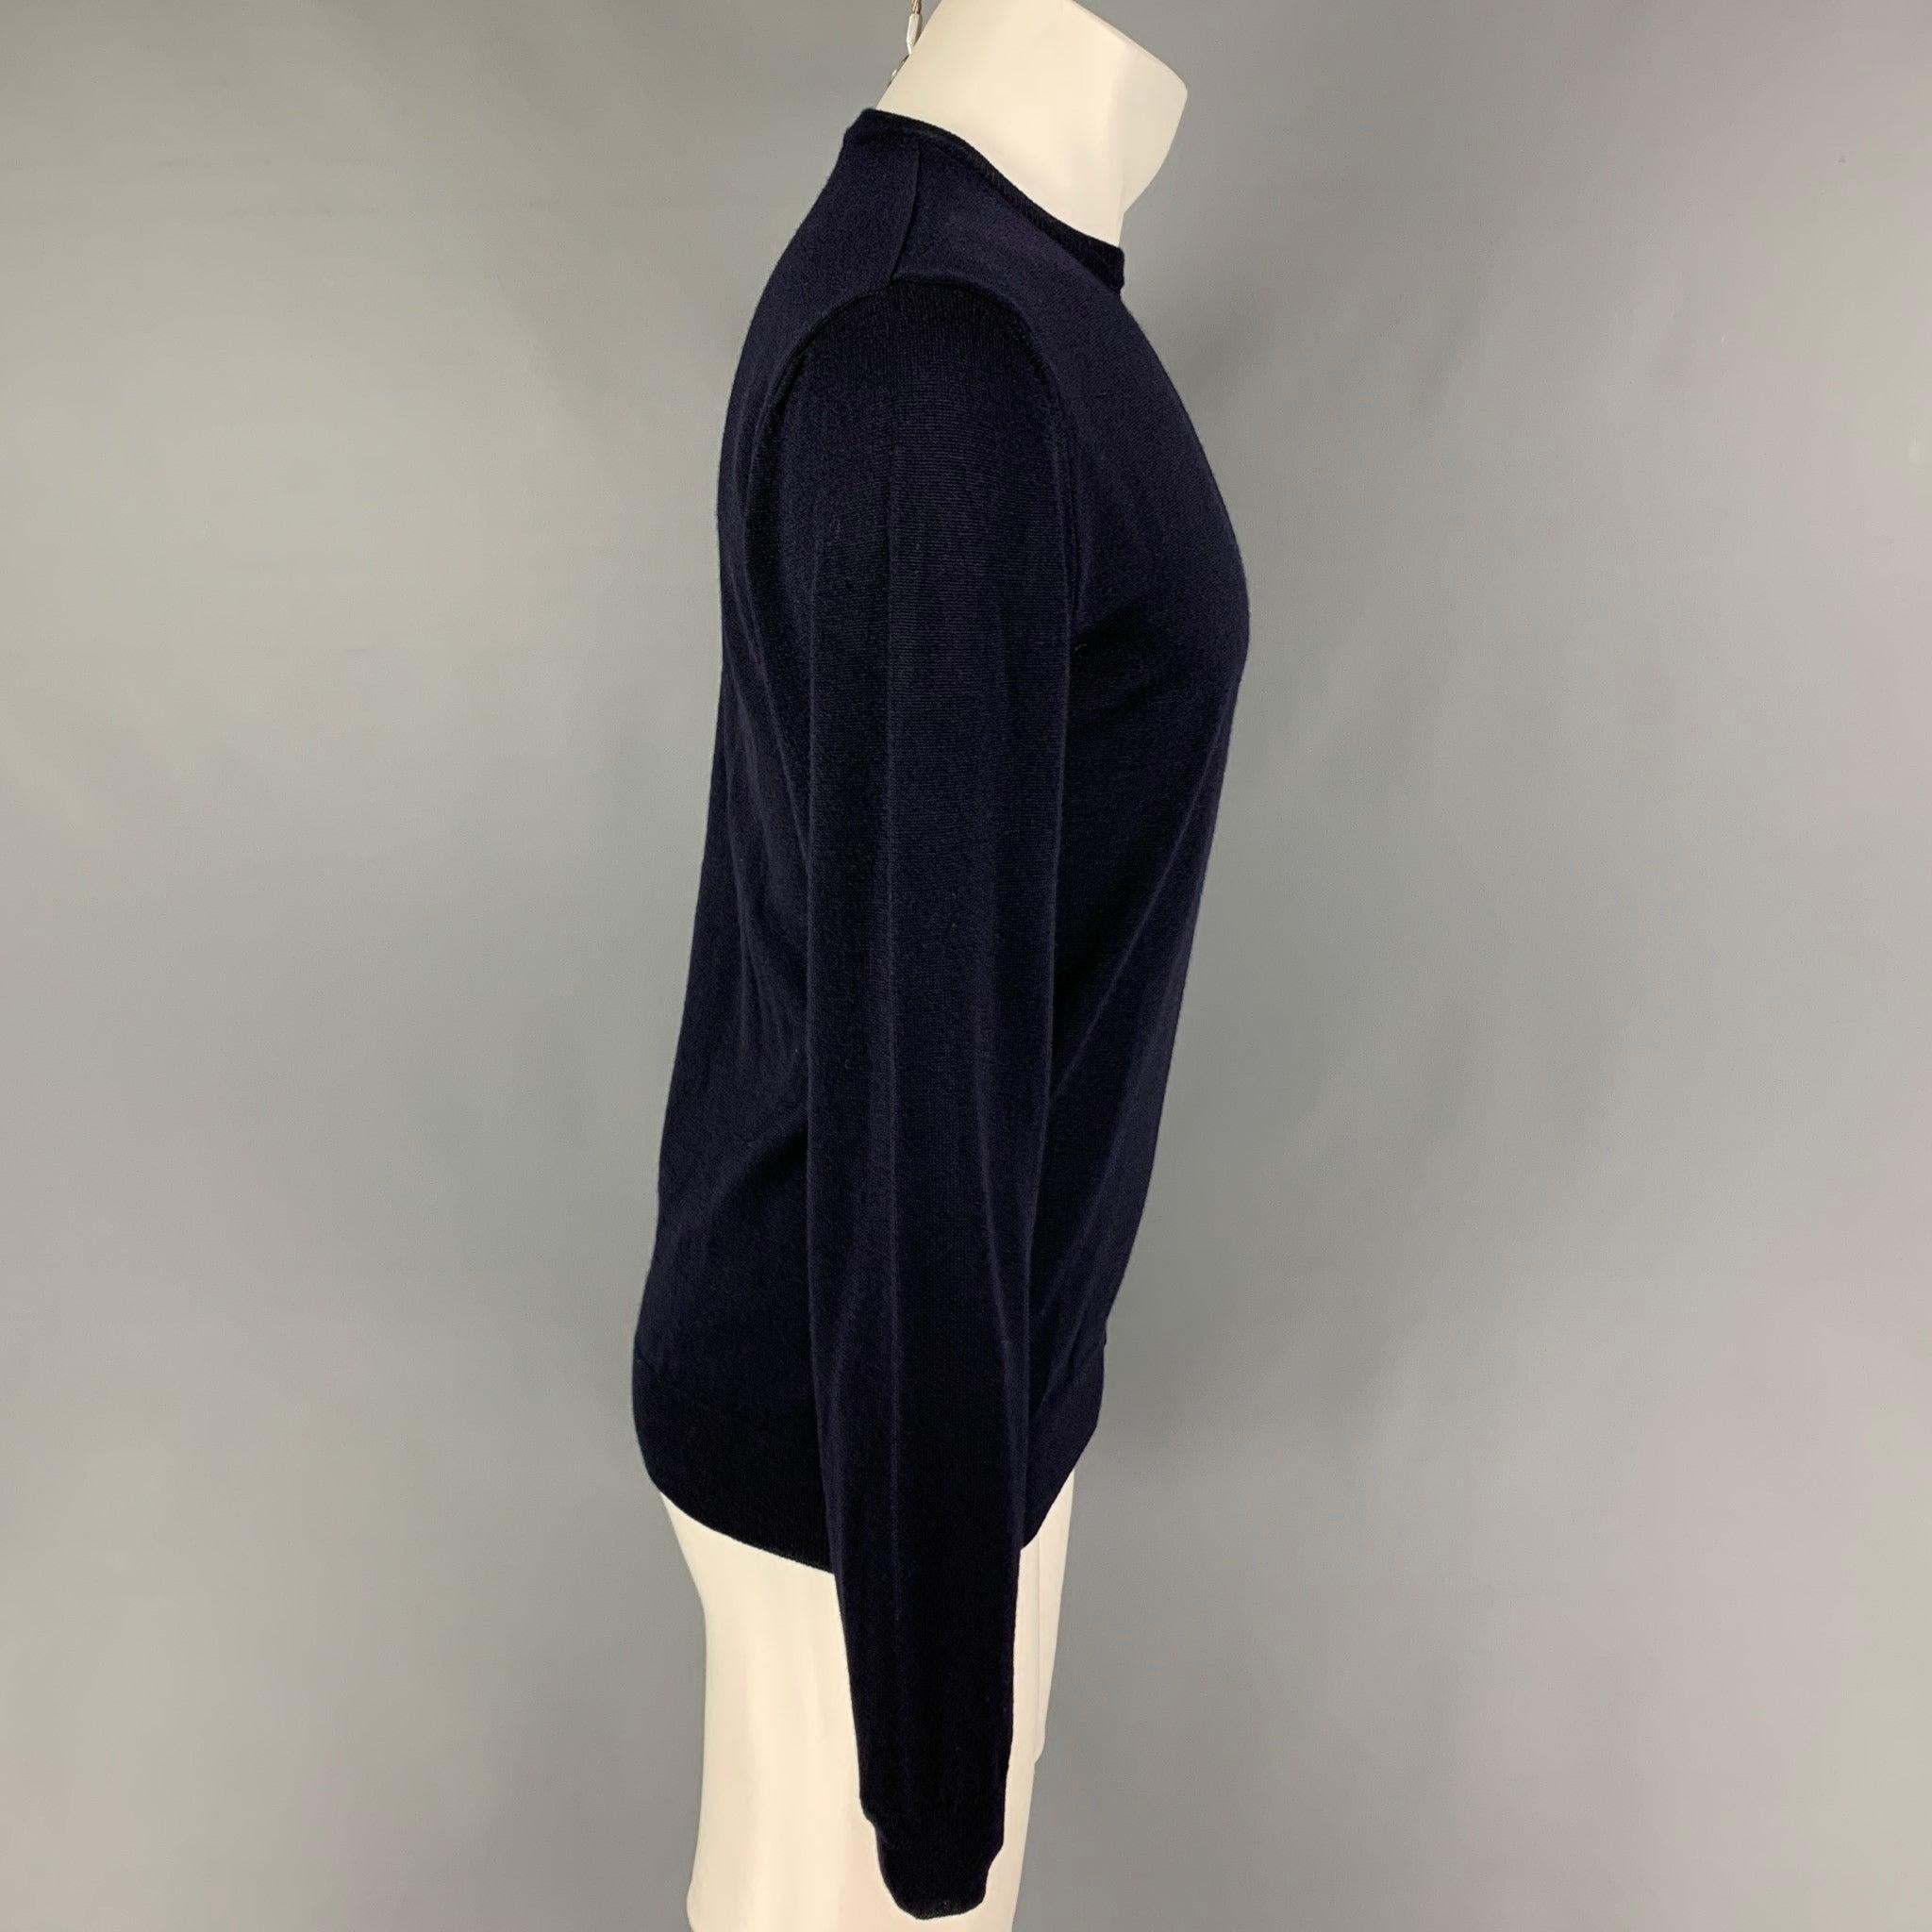 VERSACE COLLECTION pullover comes in a navy knitted merino wool featuring a slim fit, embroidered logo, and a crew-neck.
Very Good
Pre-Owned Condition. 

Marked:   L  

Measurements: 
 
Shoulder: 17 inches  Chest: 38 inches  Sleeve: 28 inches 